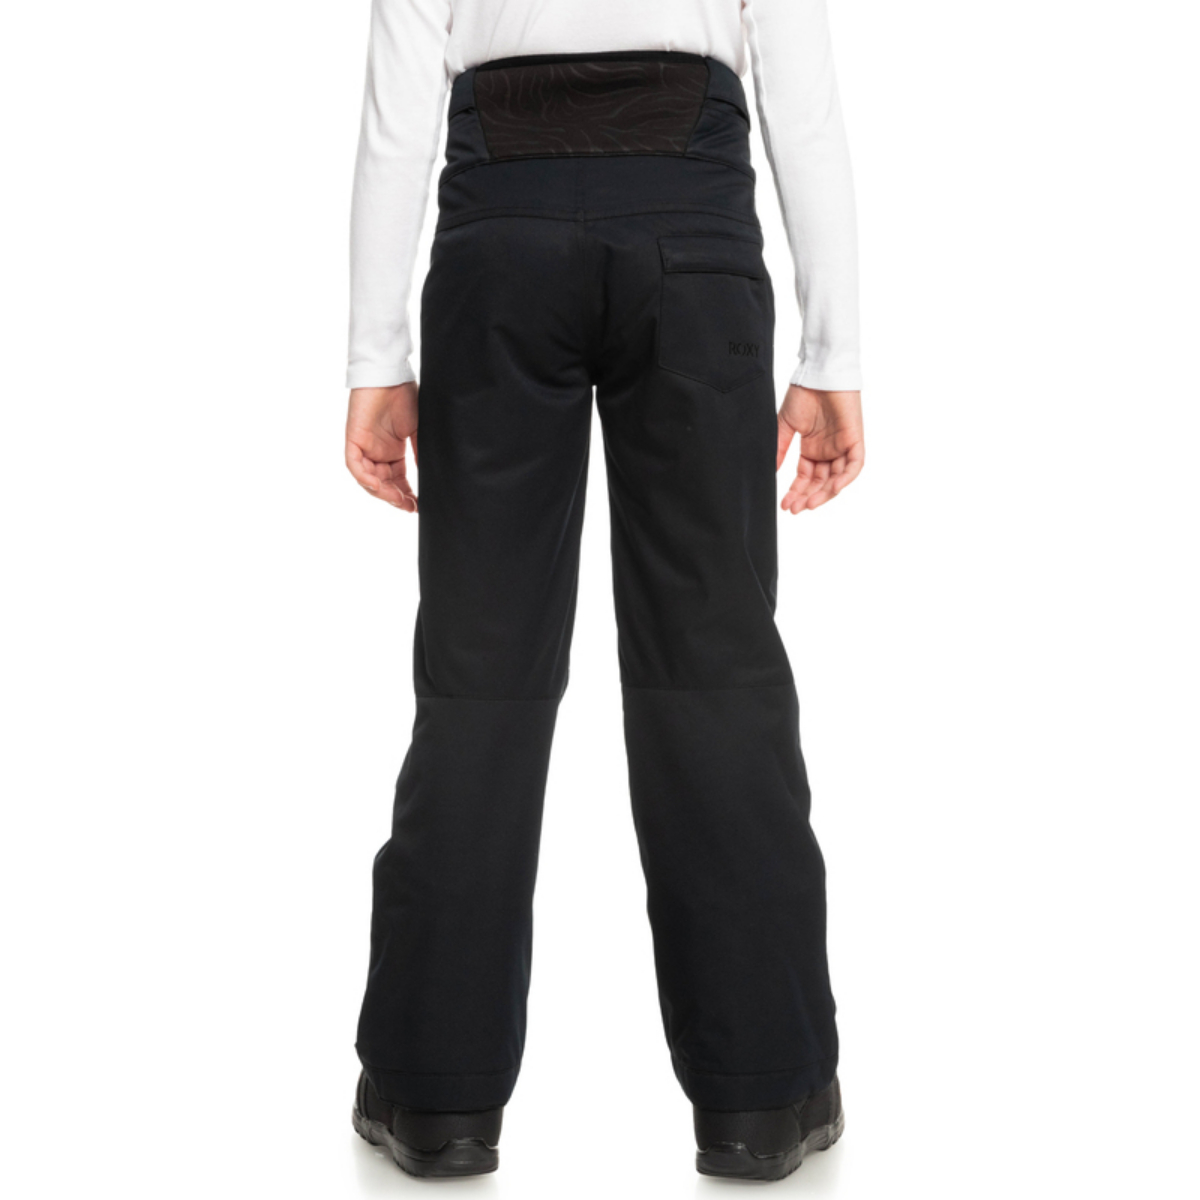 Roxy Diversion Insulated Snow Pants Girls